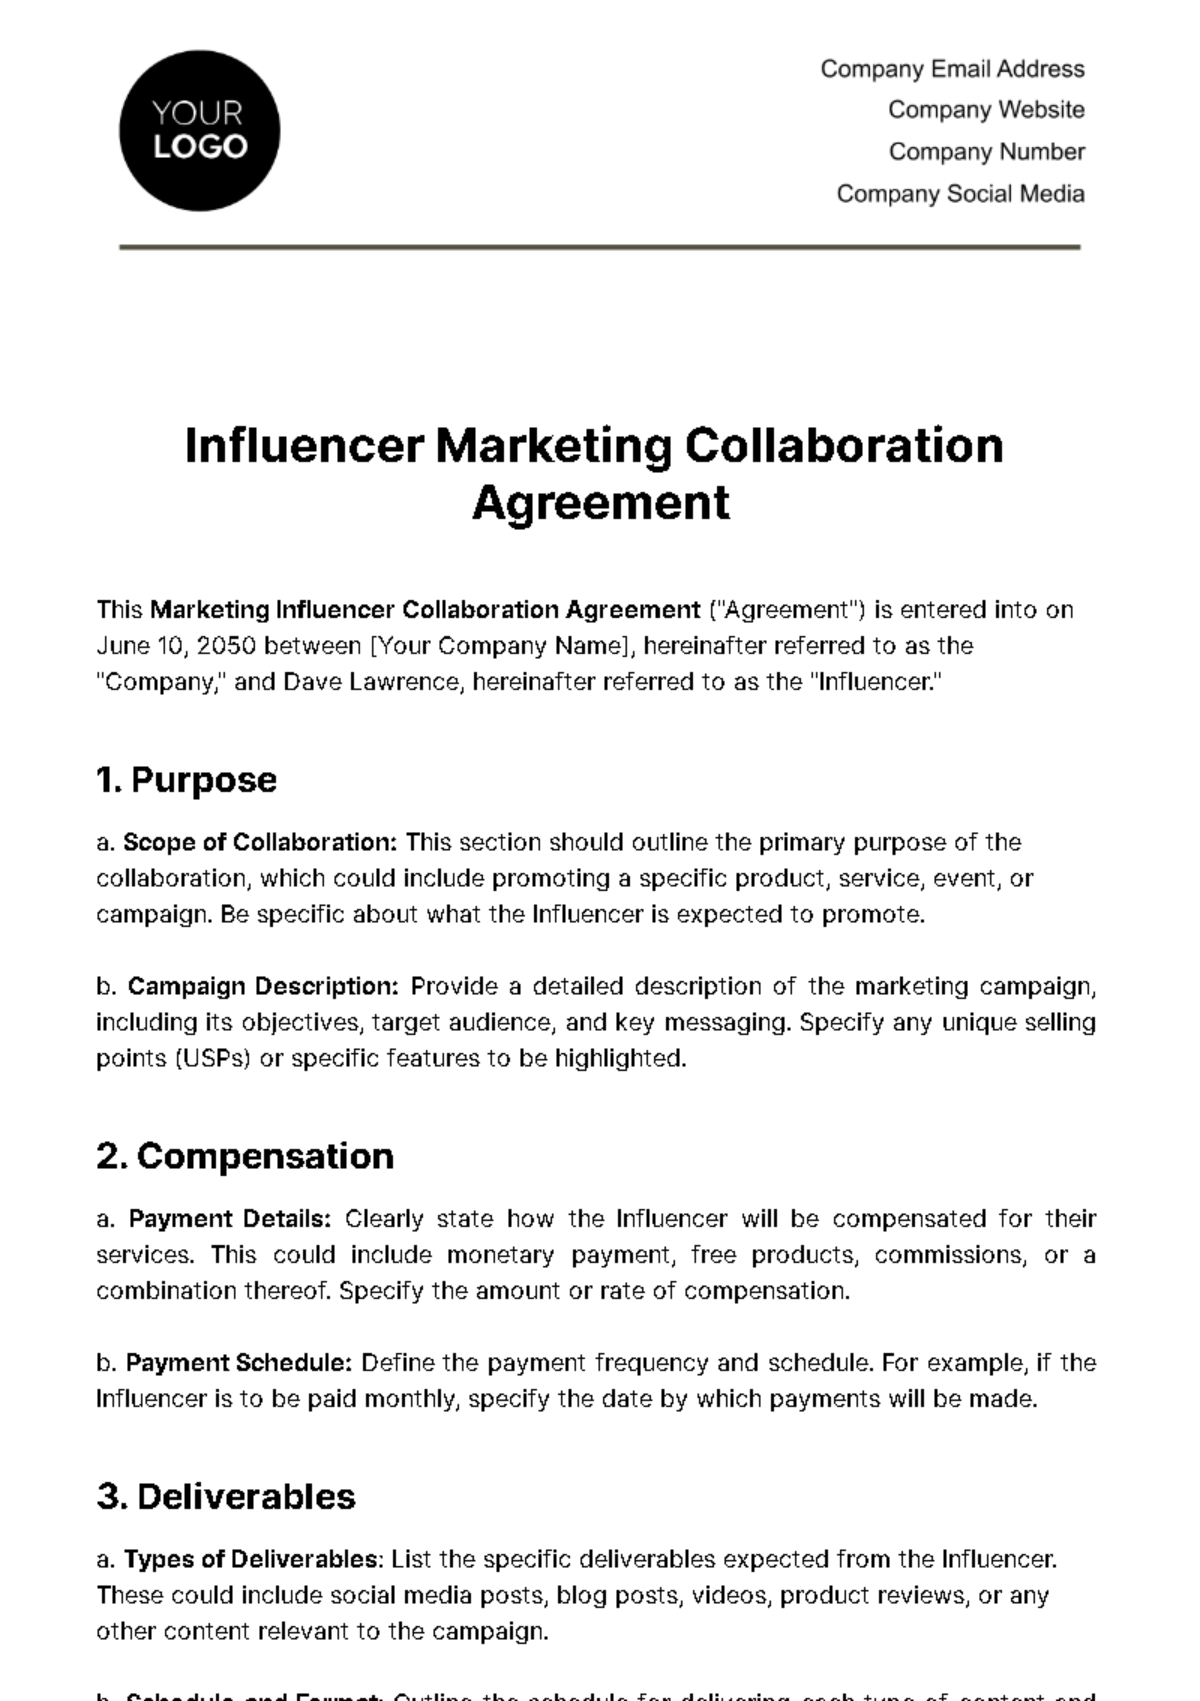  Marketing Influencer Collaboration Agreement Template